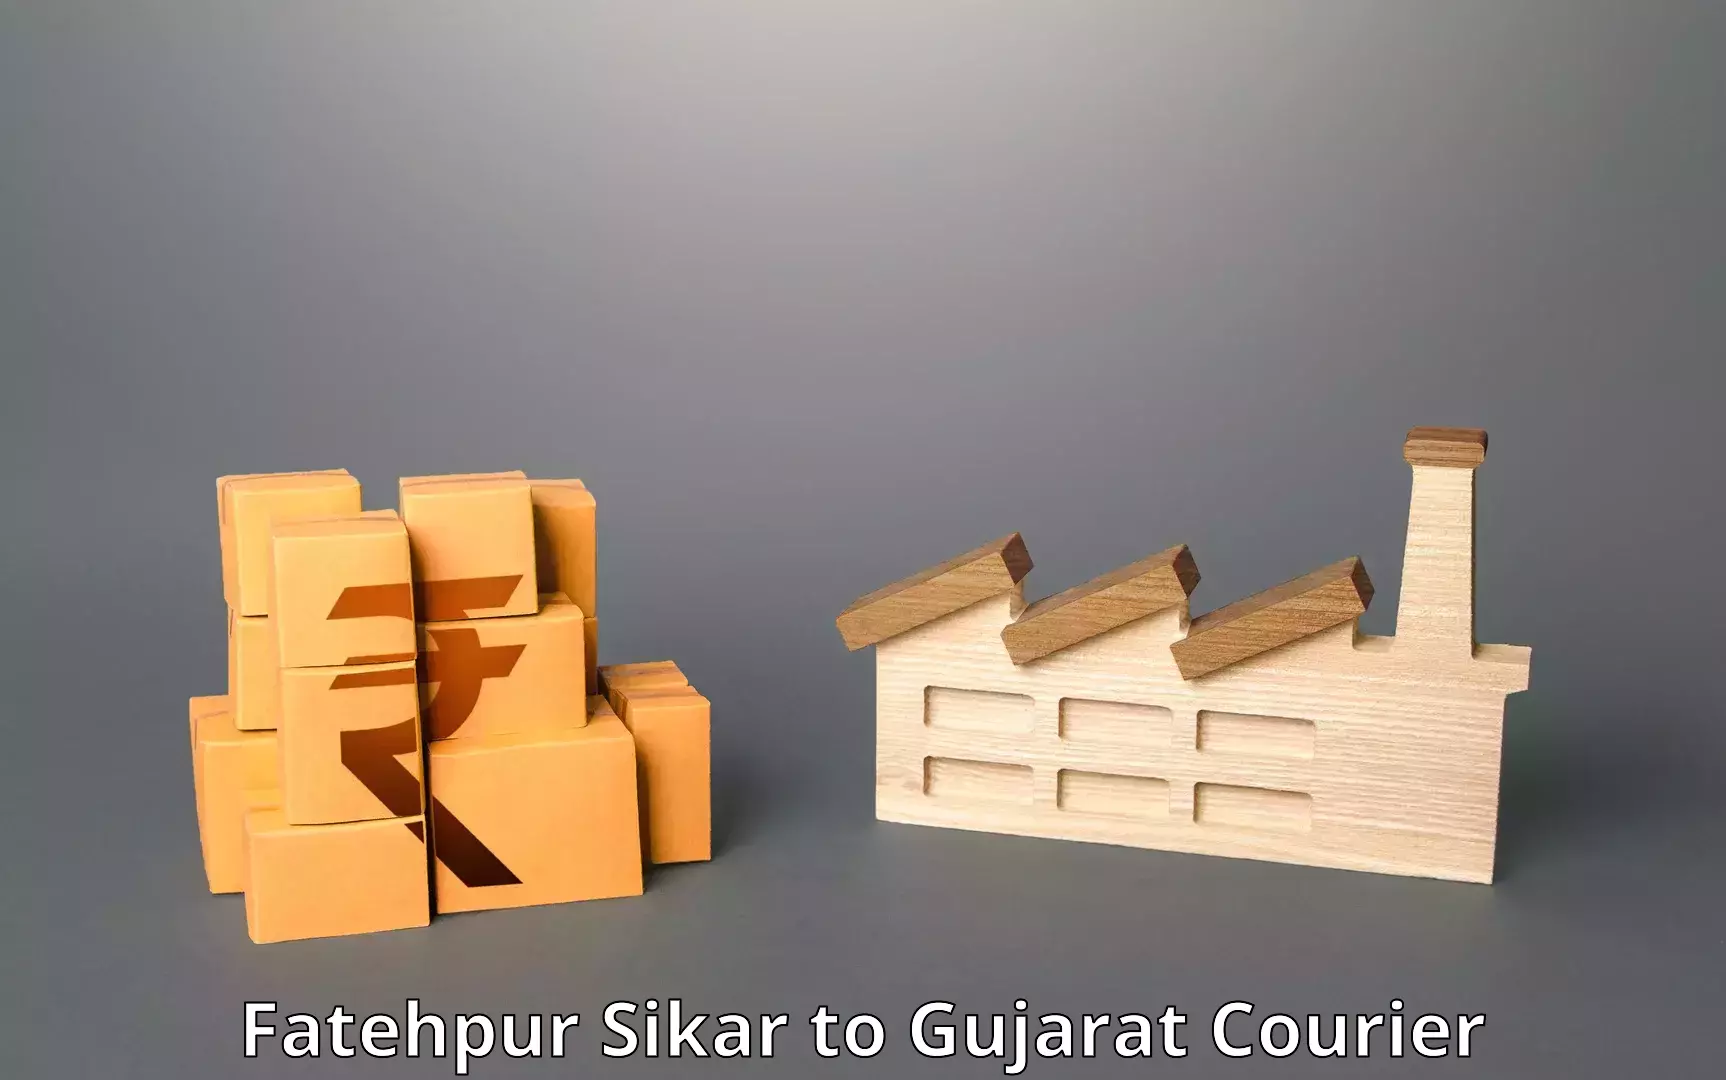 Global shipping networks Fatehpur Sikar to Anand